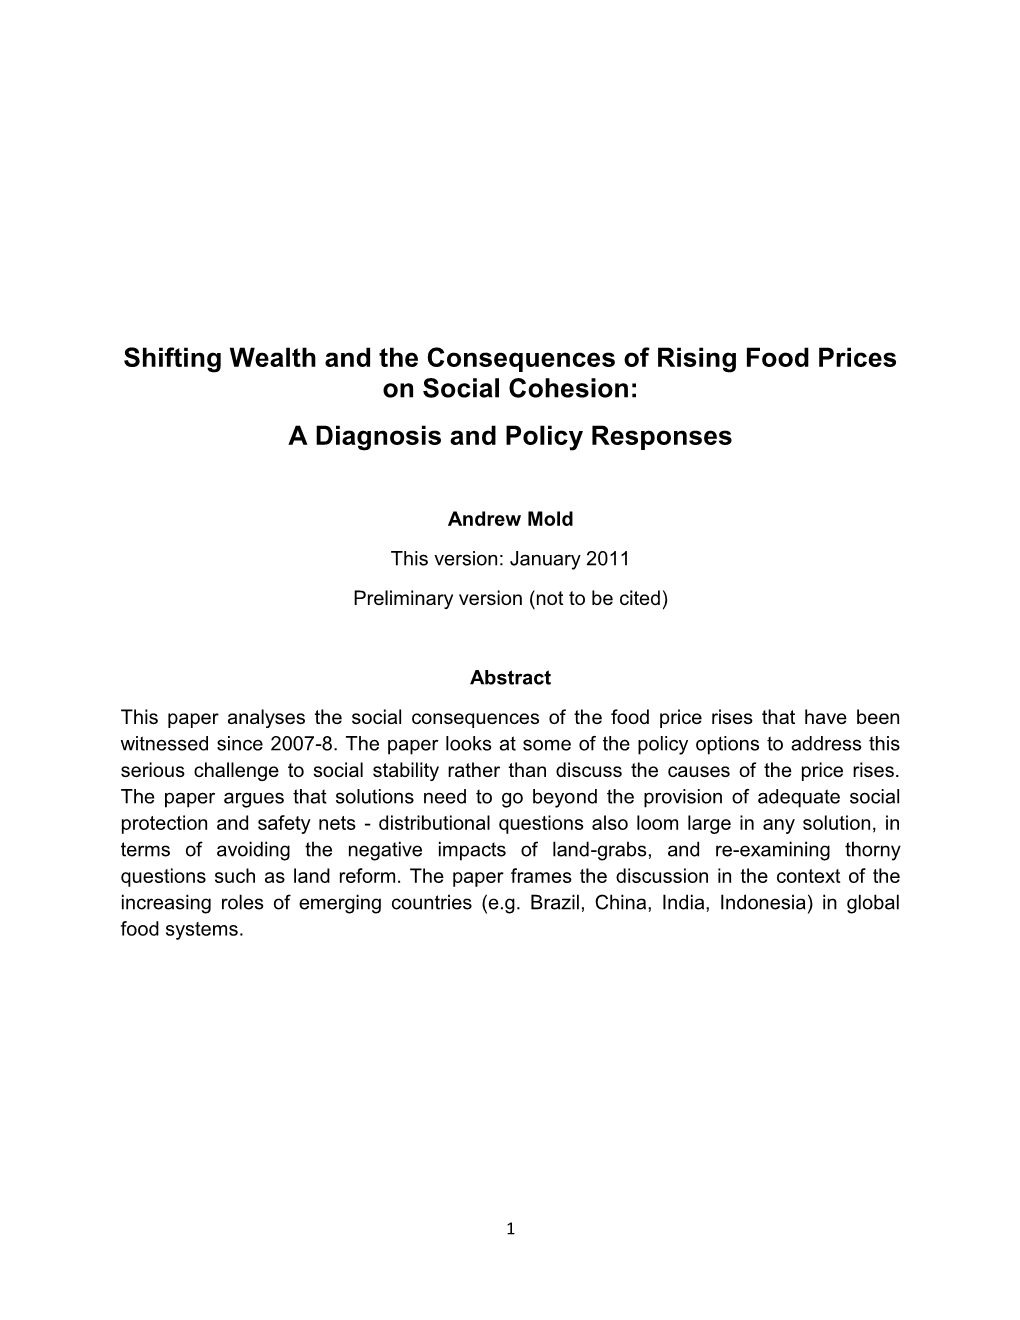 Shifting Wealth and the Consequences of Rising Food Prices on Social Cohesion: a Diagnosis and Policy Responses